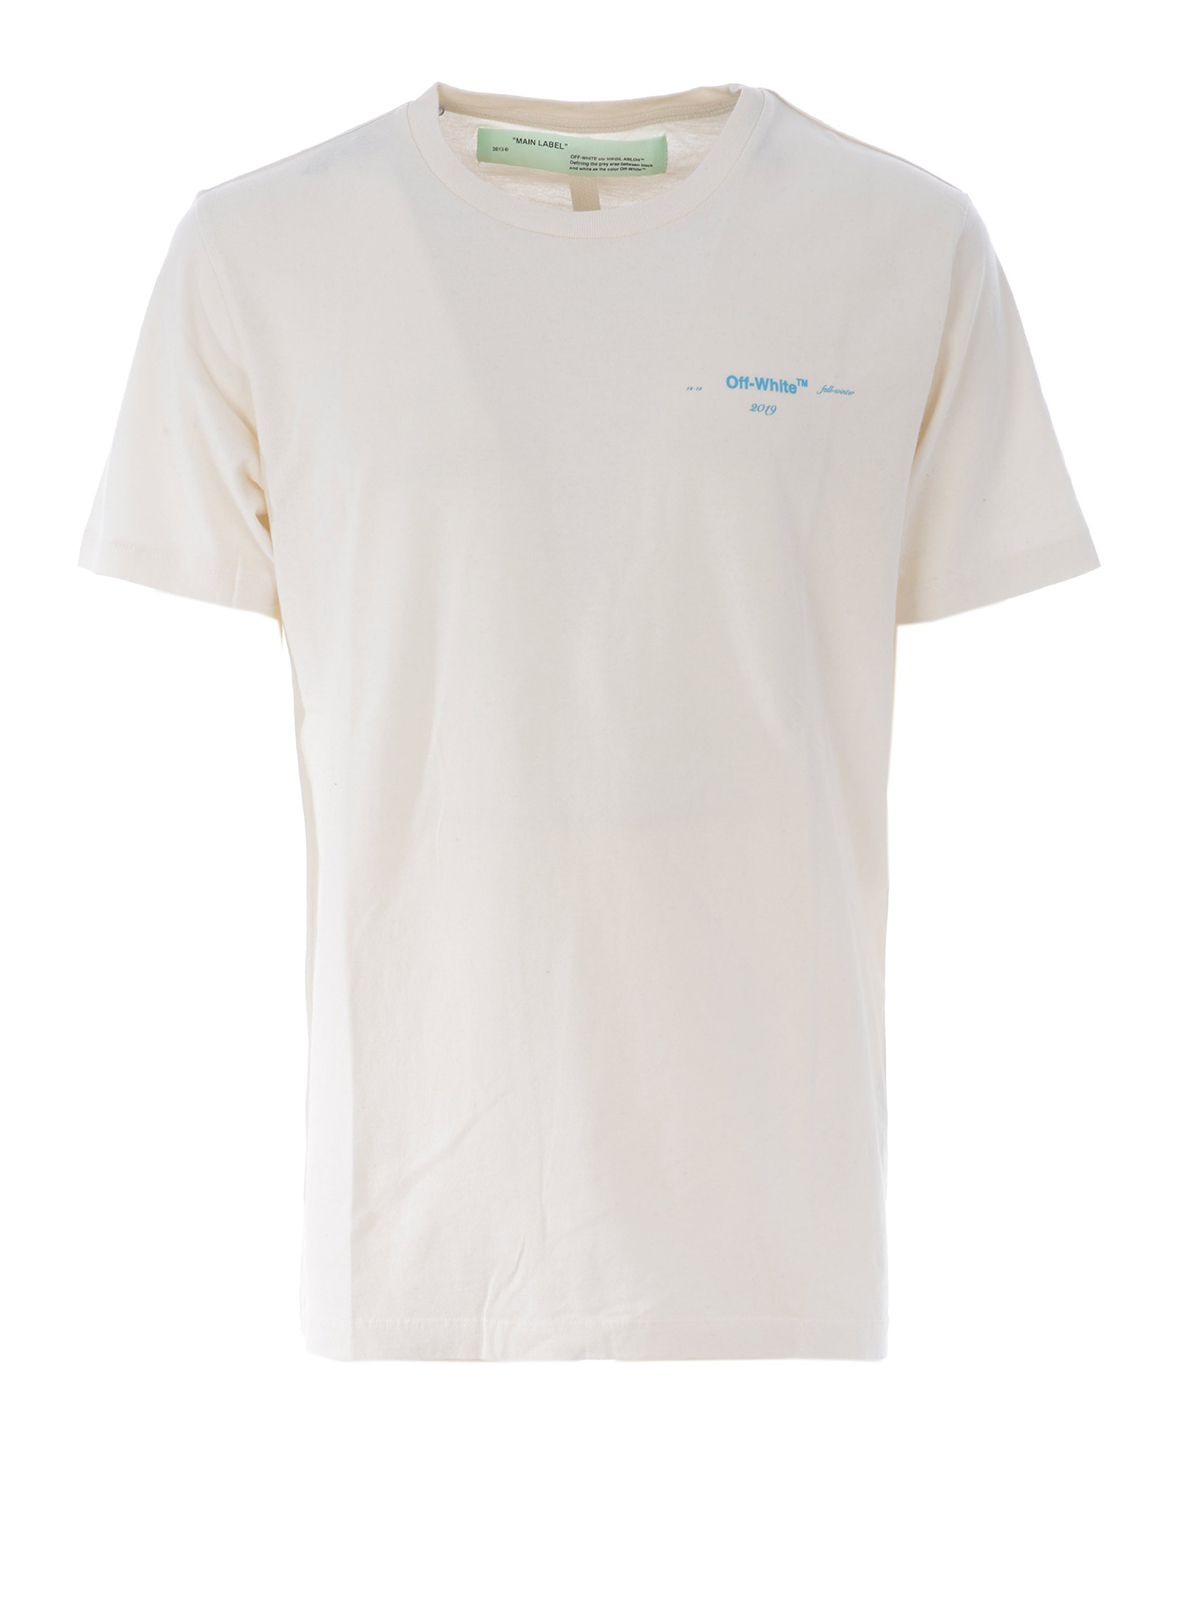 T-shirts Off-White - Gradient printed -